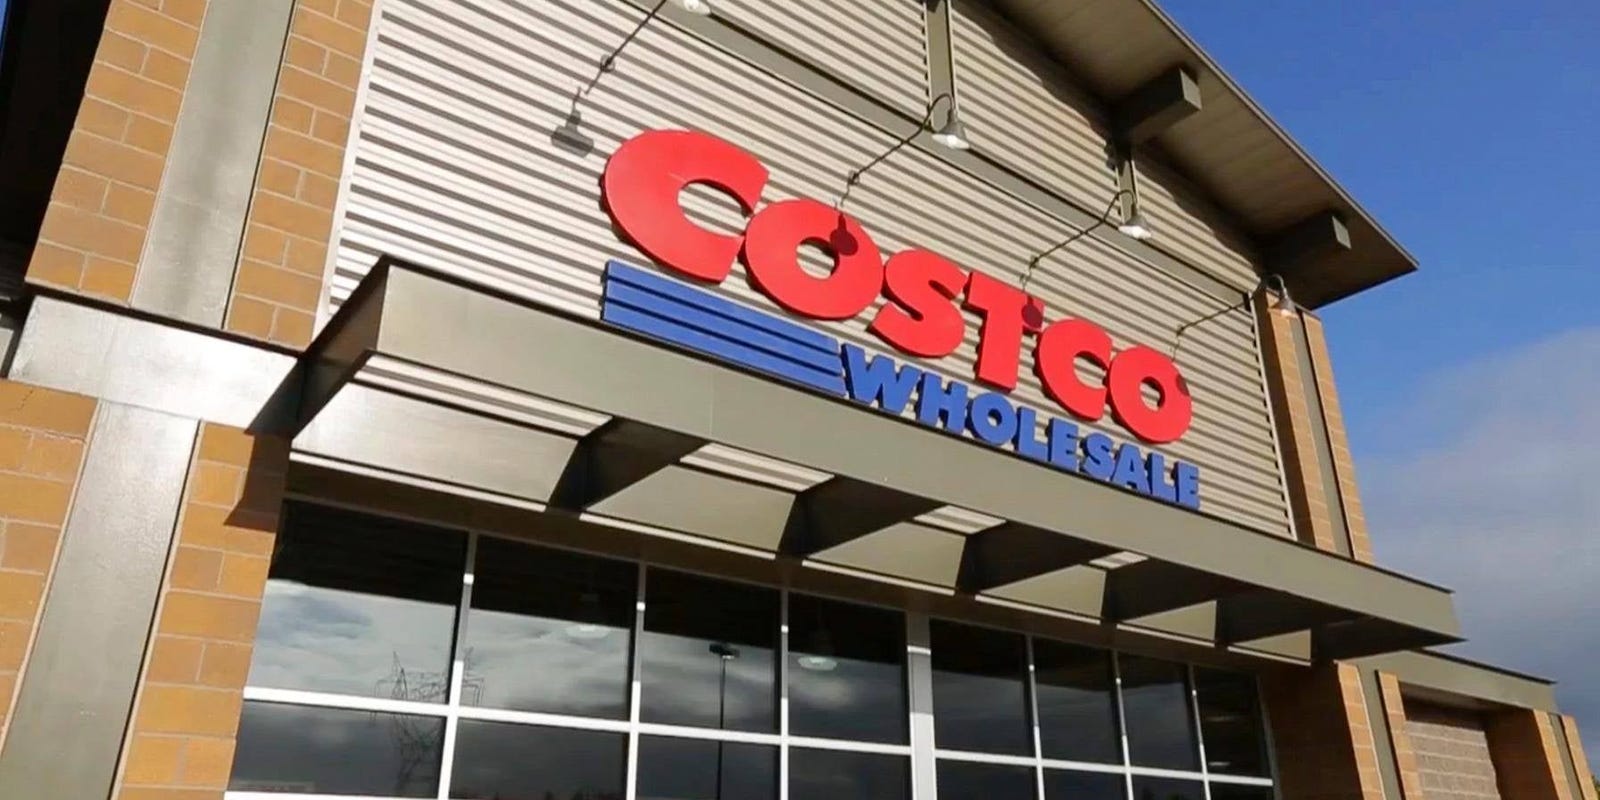 Costco to require all customers to wear face masks, return to regular hours starting Monday